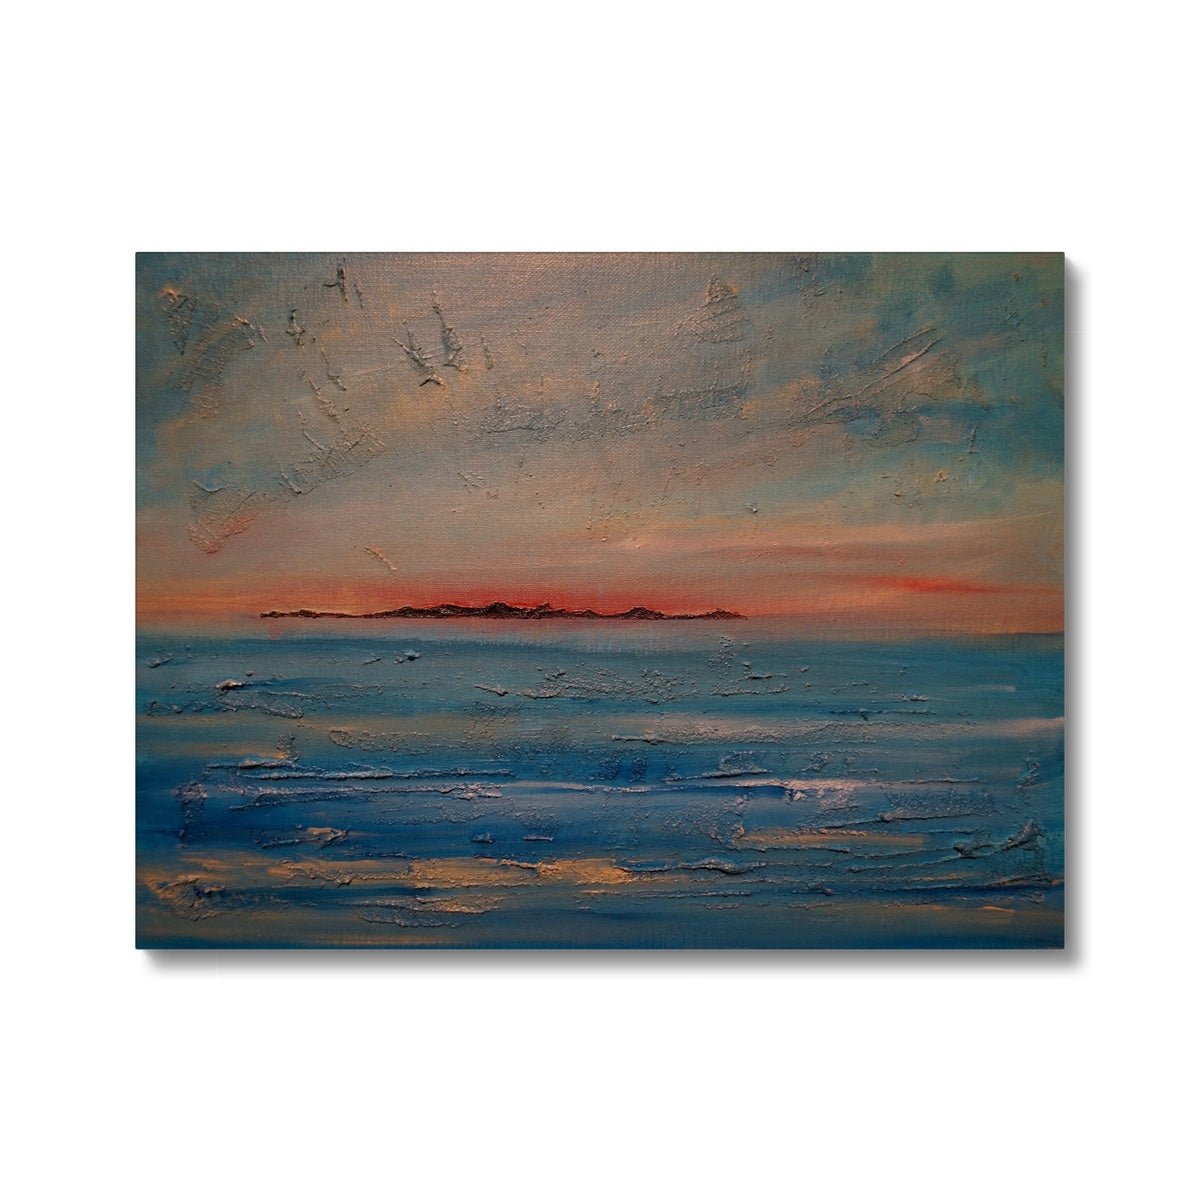 Gigha Sunset Painting | Canvas From Scotland-Contemporary Stretched Canvas Prints-Hebridean Islands Art Gallery-24"x18"-Paintings, Prints, Homeware, Art Gifts From Scotland By Scottish Artist Kevin Hunter